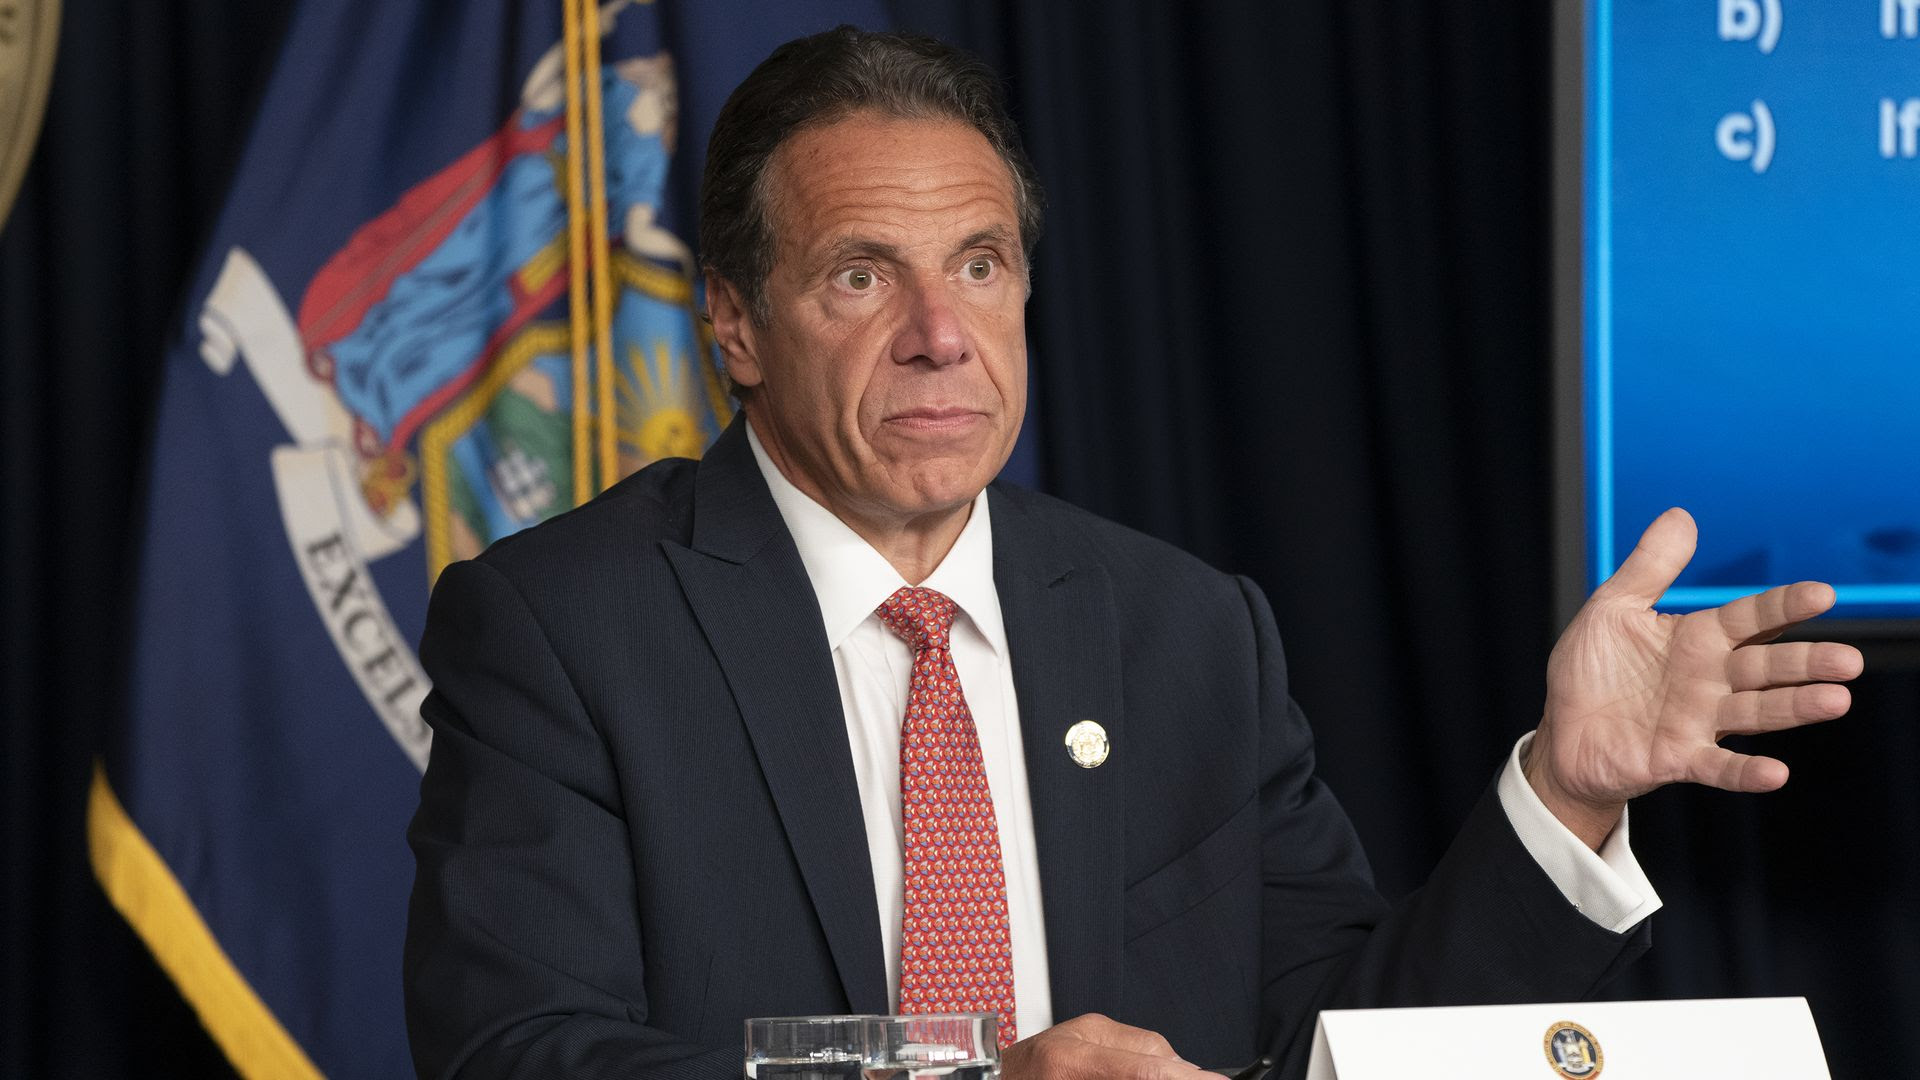 Prosecutors request the evidence gathered from damning Cuomo investigation